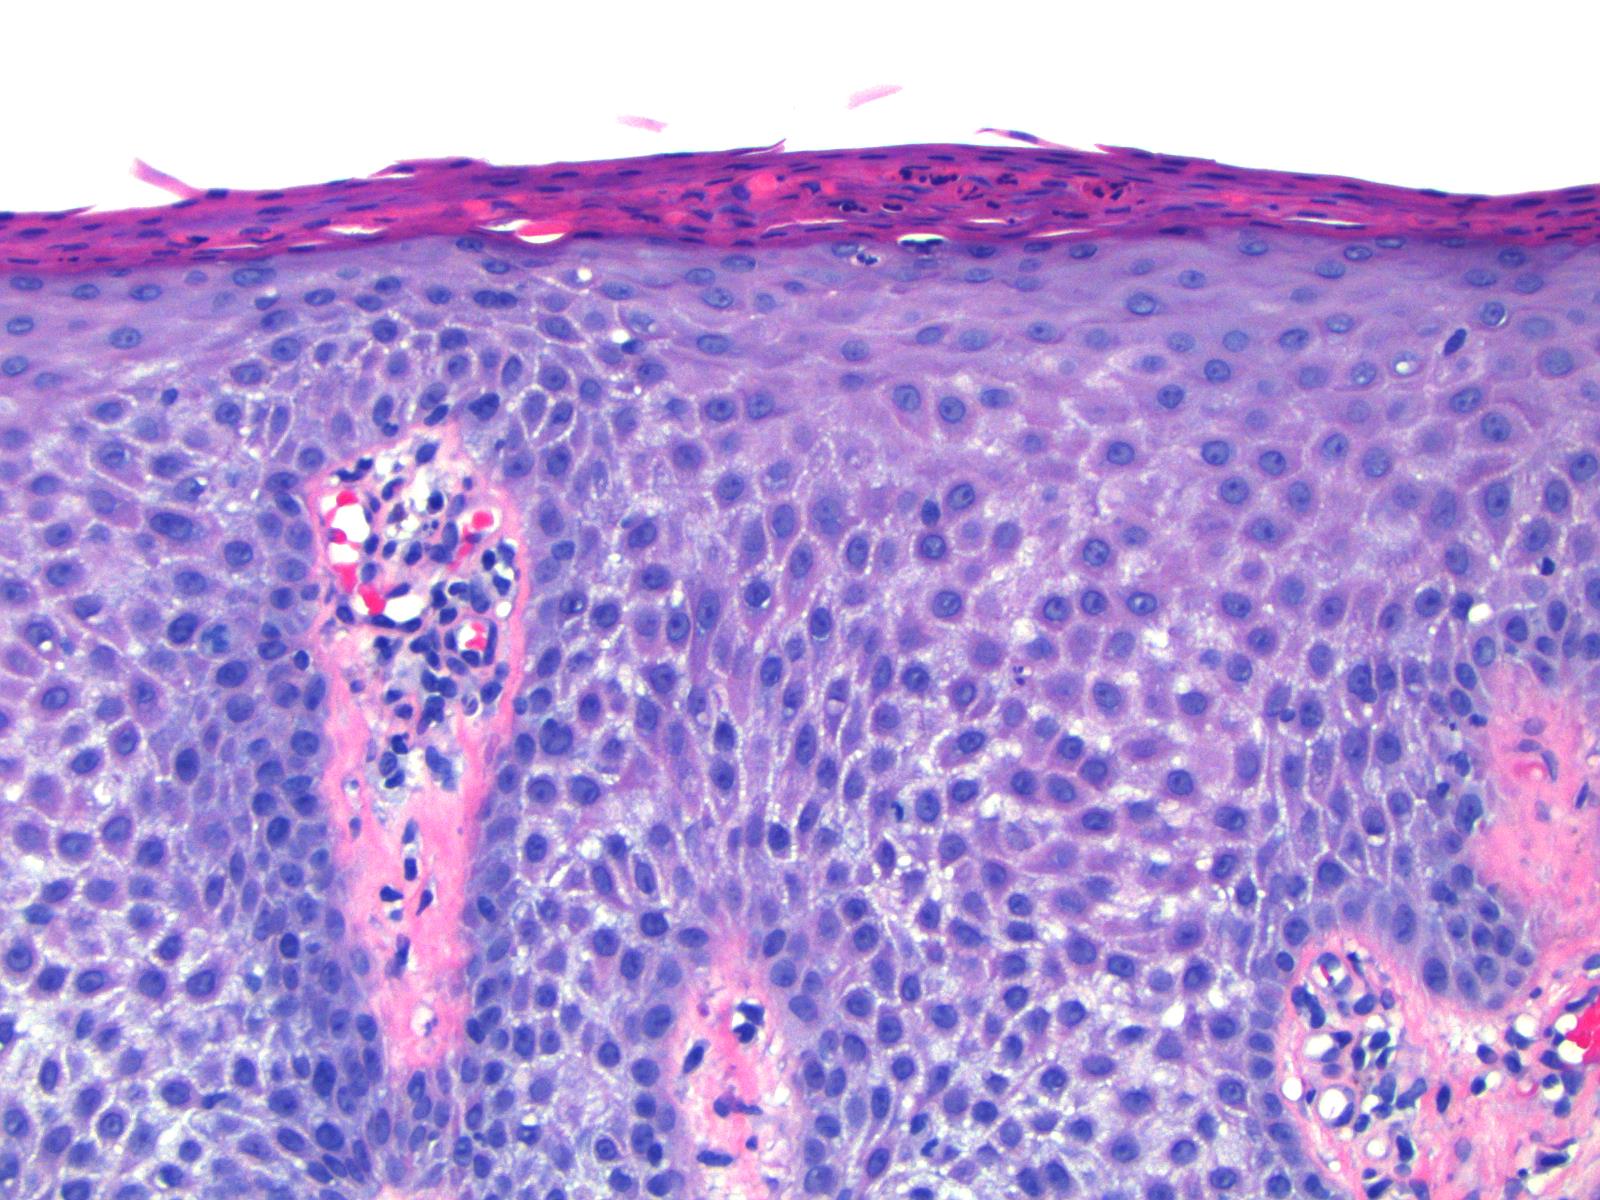 large cell acanthoma #11